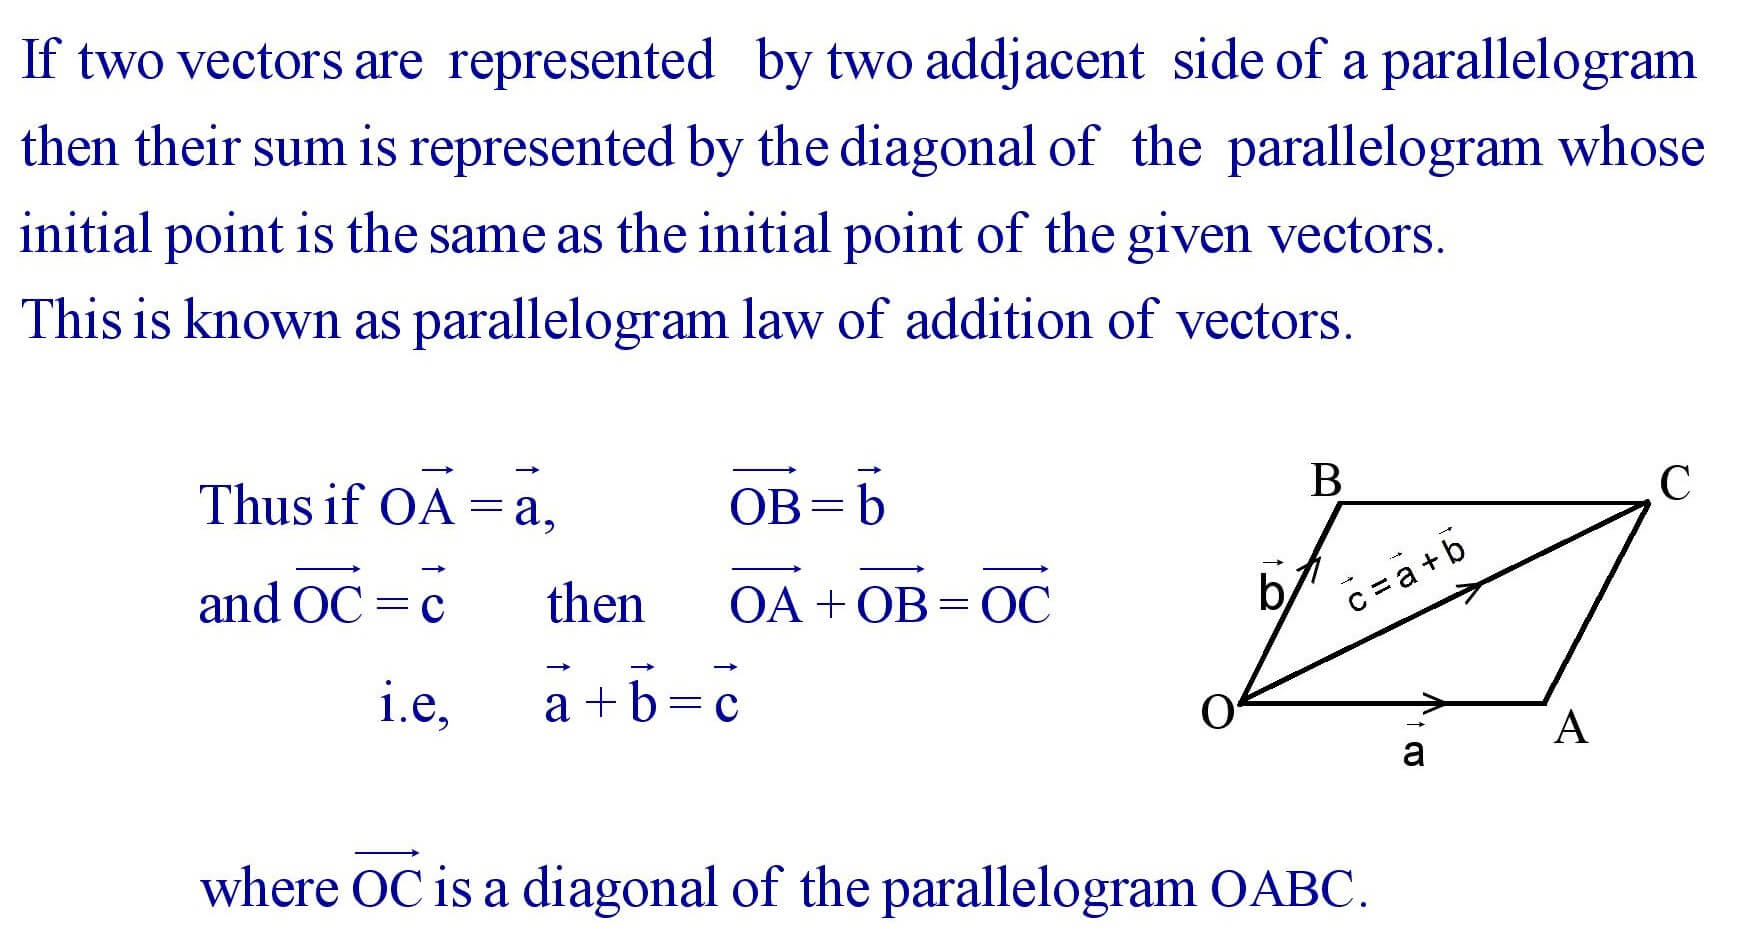 Parallelogram law of addition